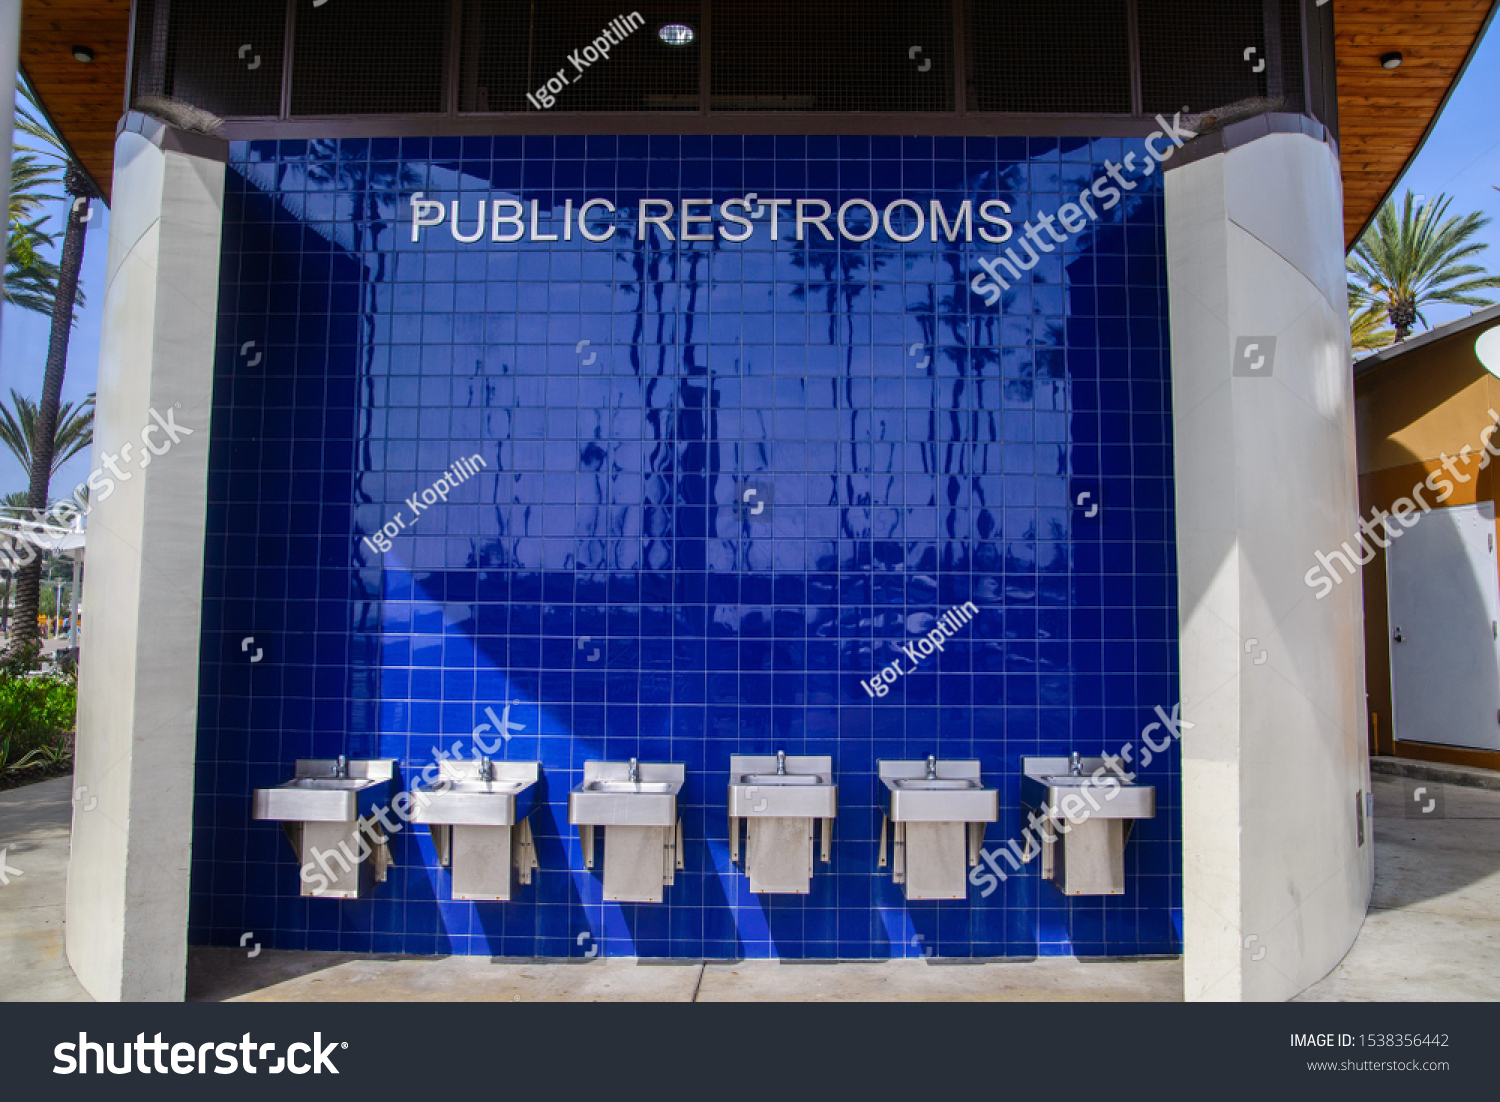 simple design of a public restrooms. washroom on open air by the restroom. blue tiles wall #1538356442